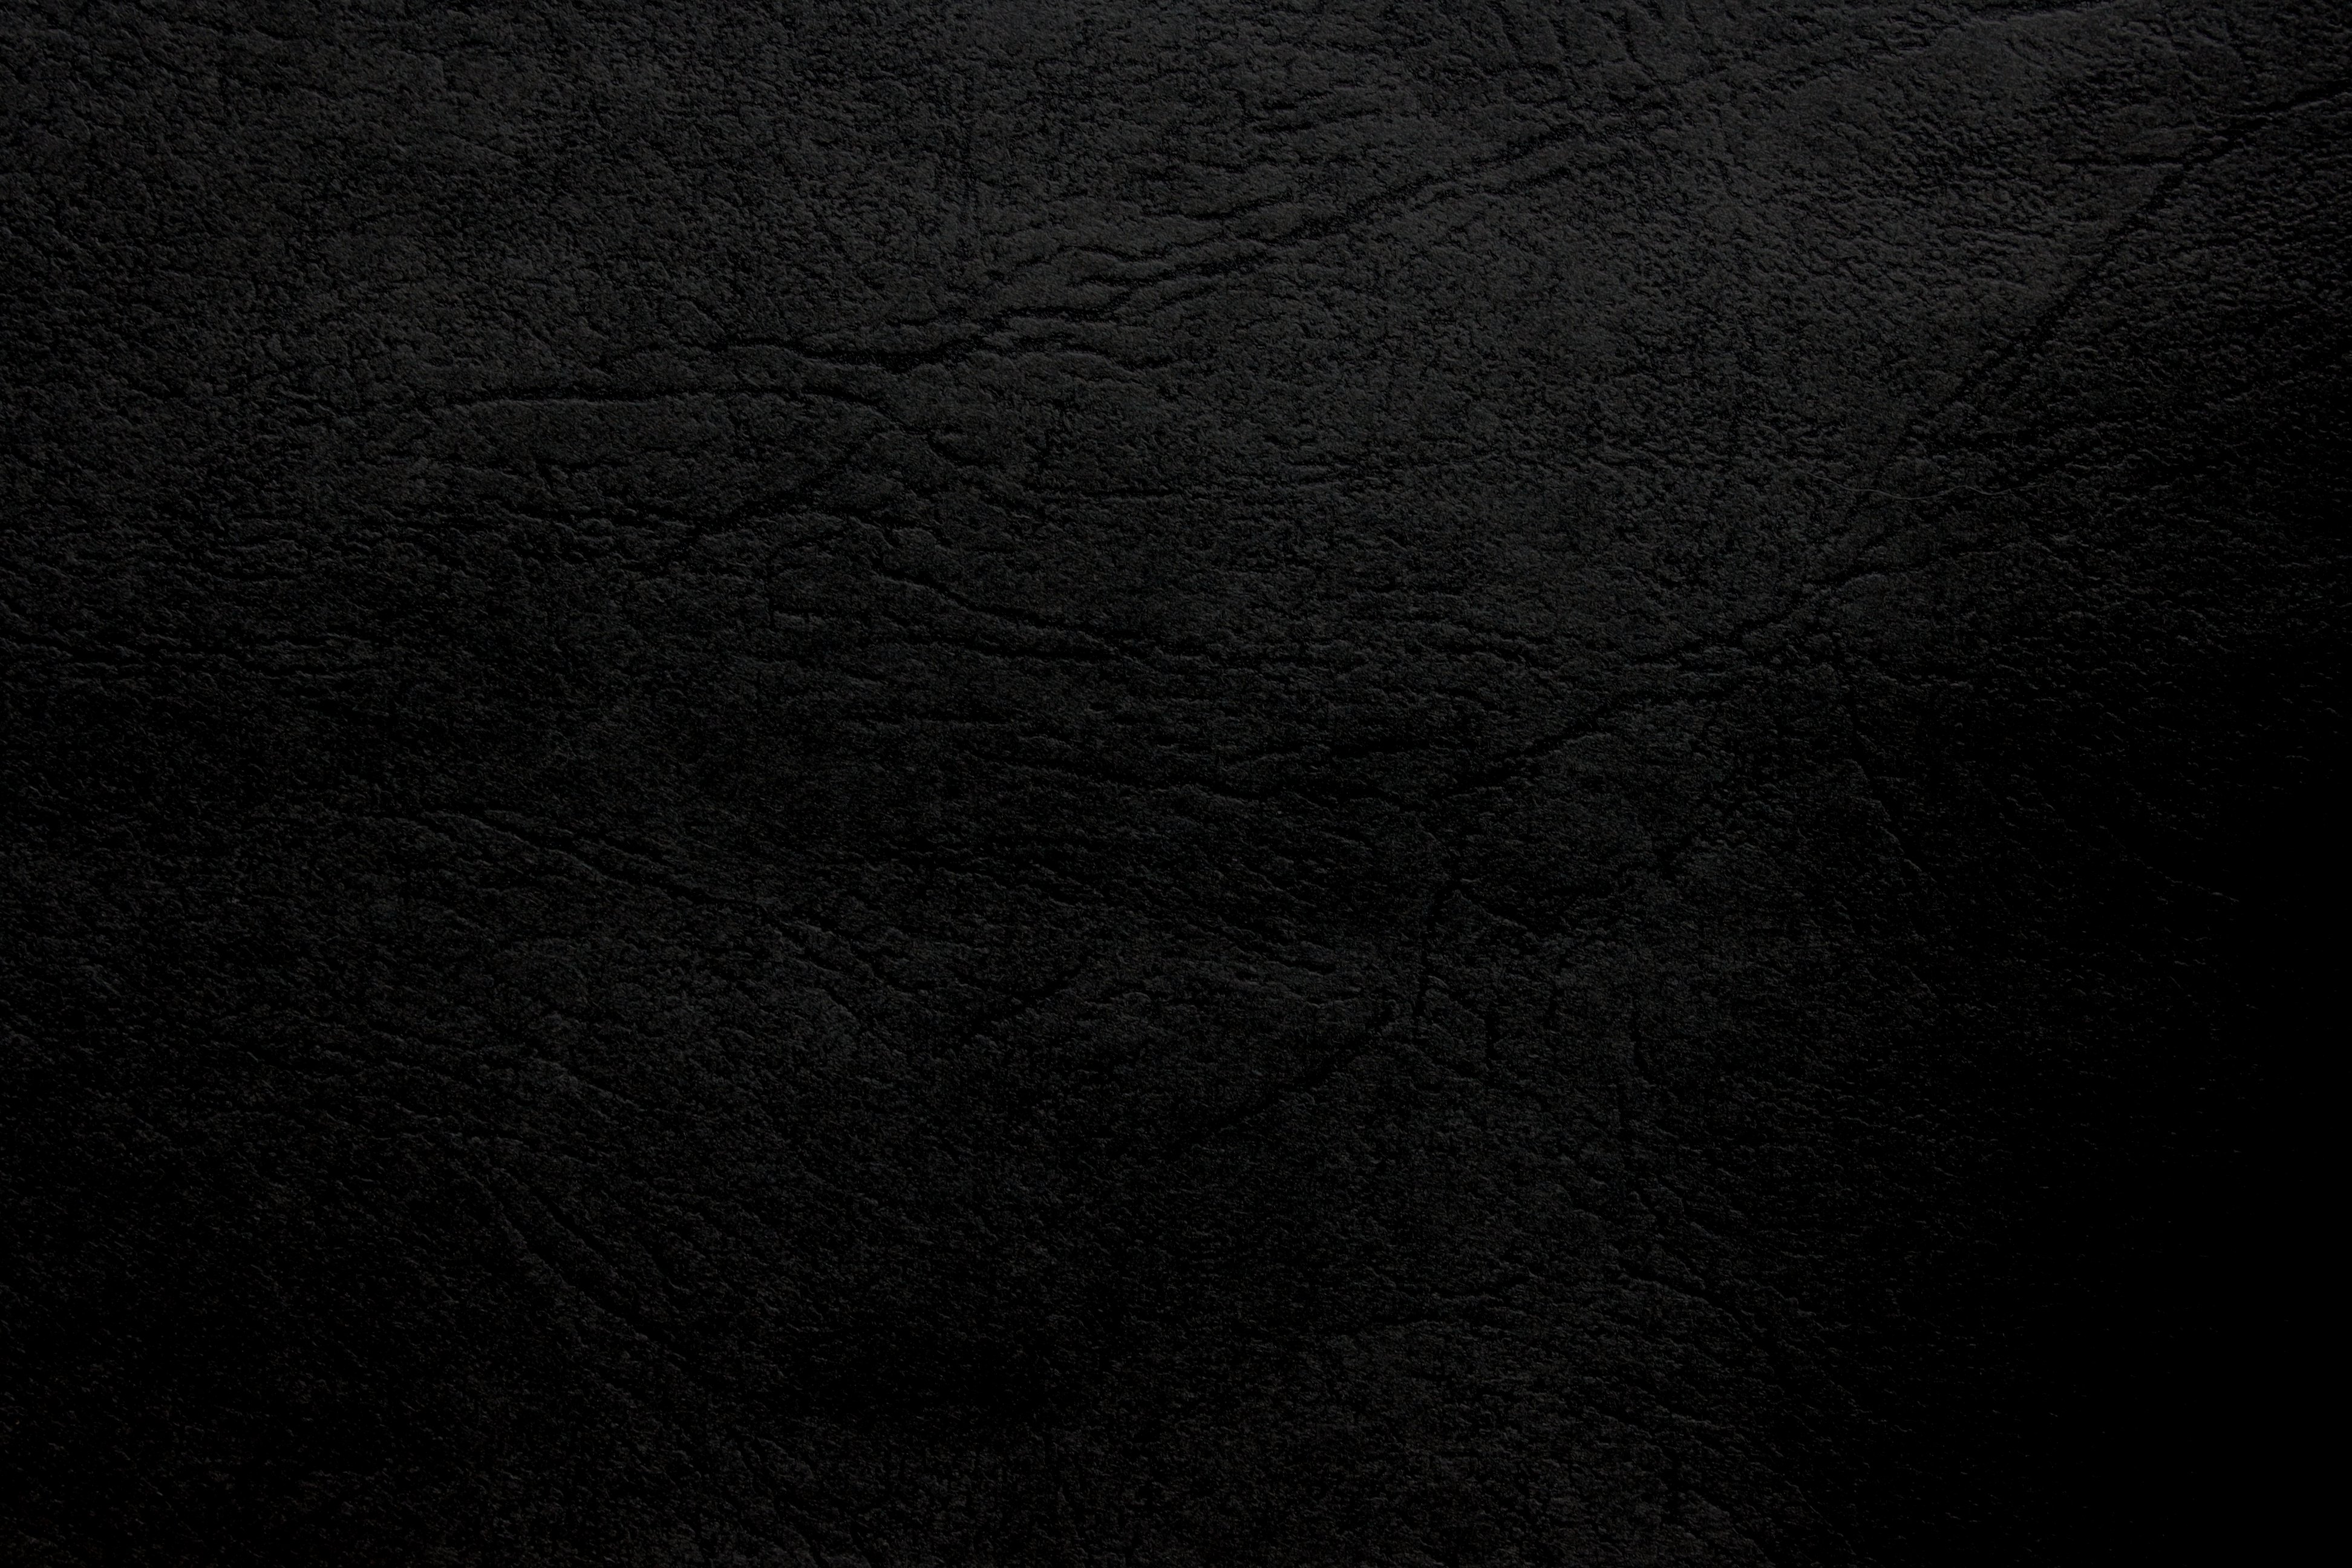 Leather Texture High Resolution Dimensions Wallpaper